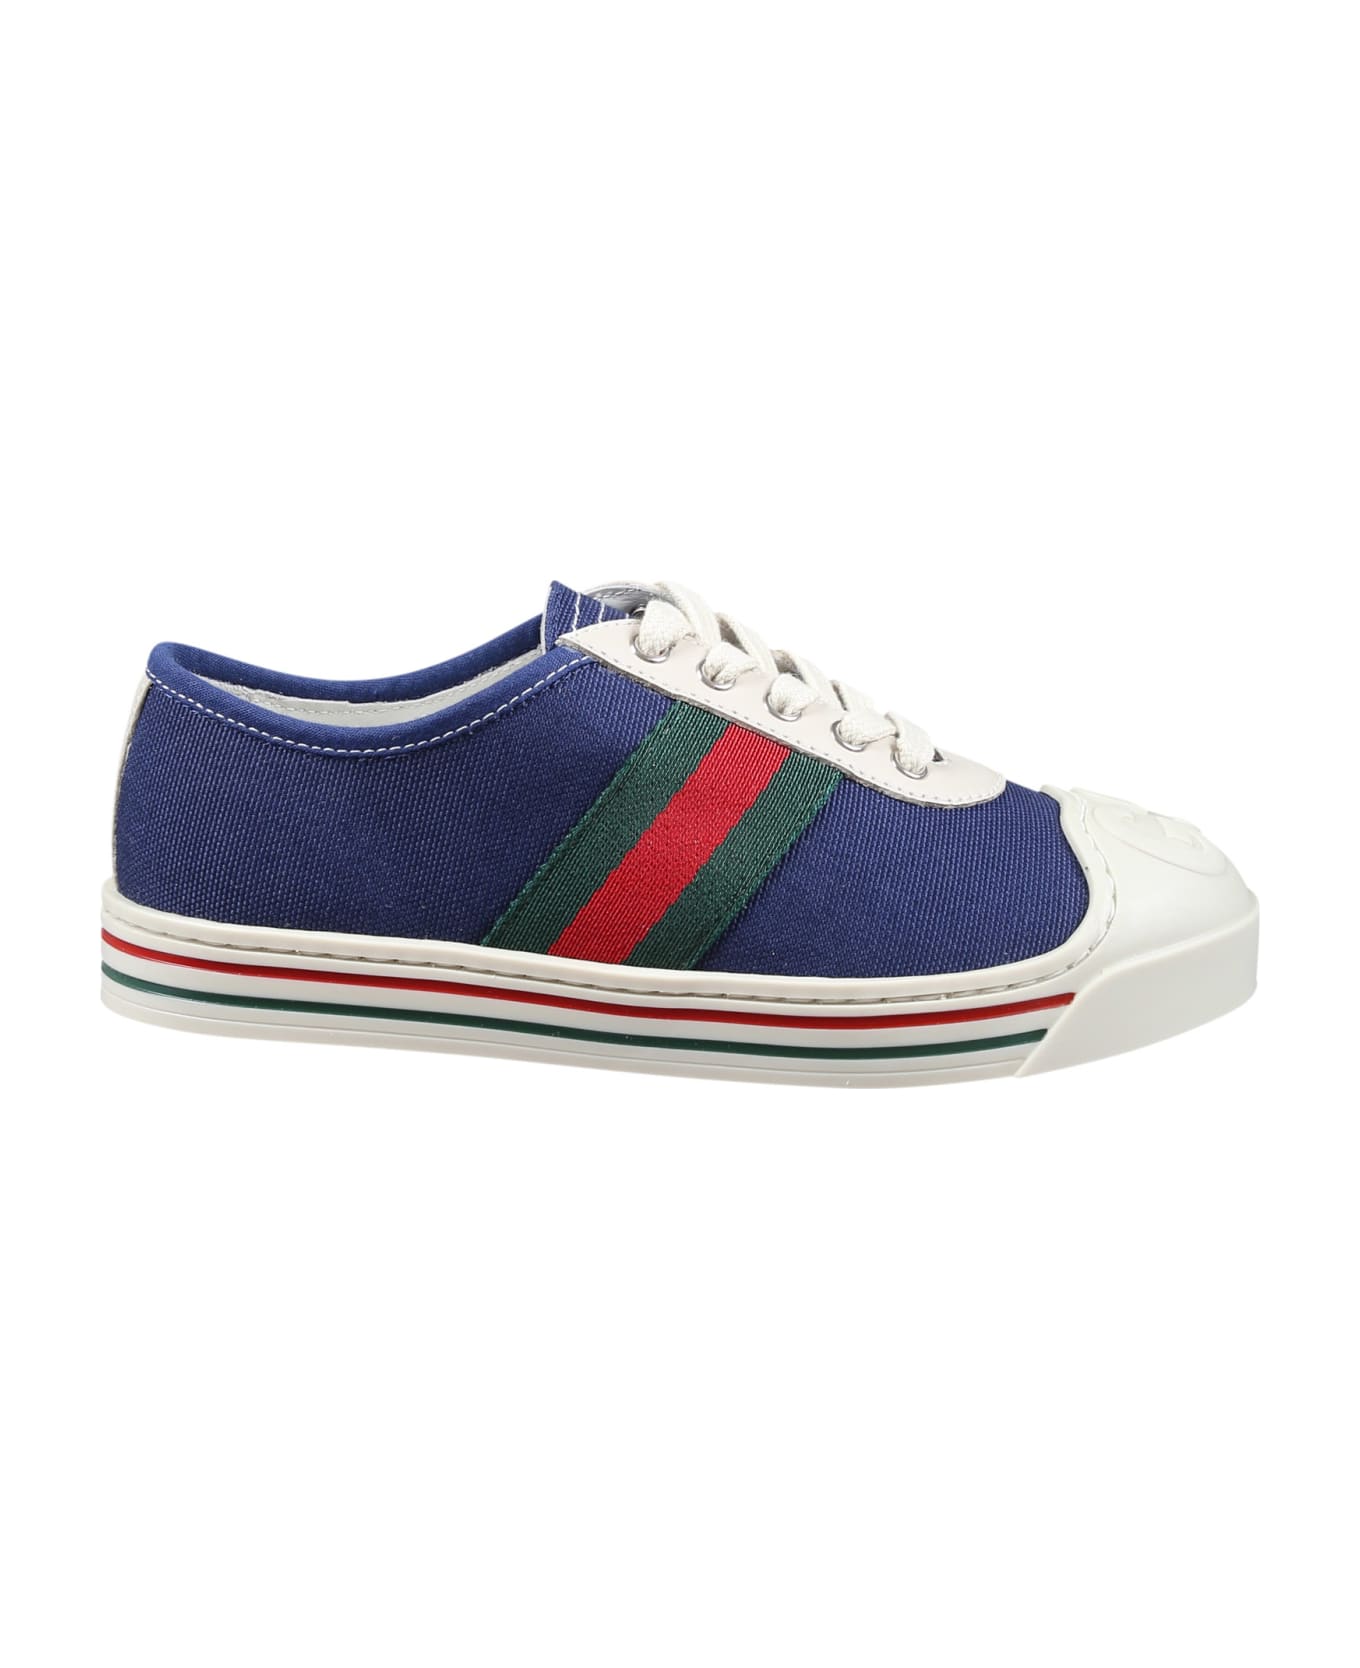 Gucci Blue Canvas Trainer For Kids With Green And Red Web - Blue